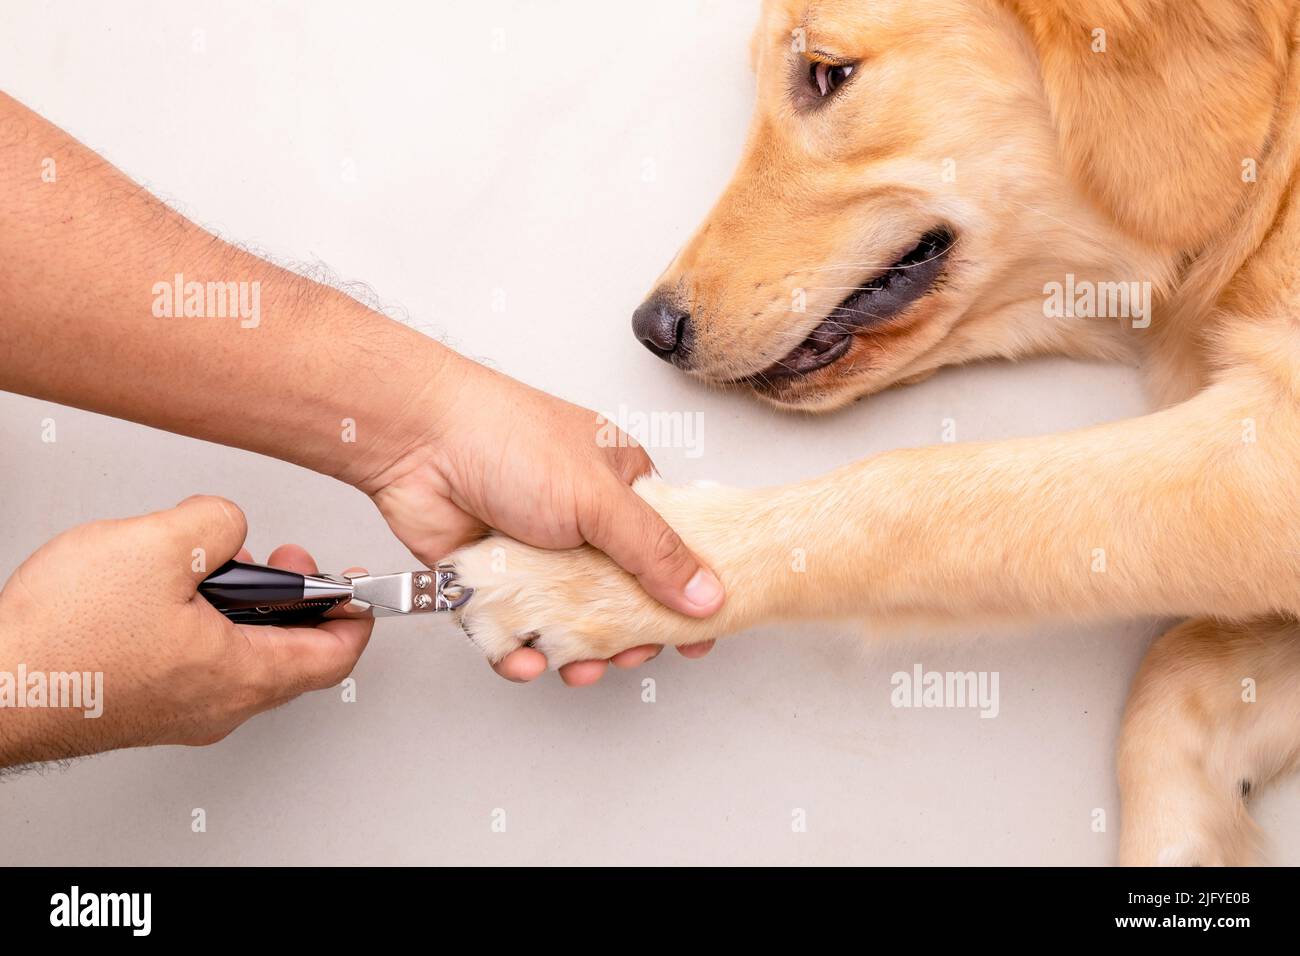 Dog nail trim - how much | UK Pet Forums Forum